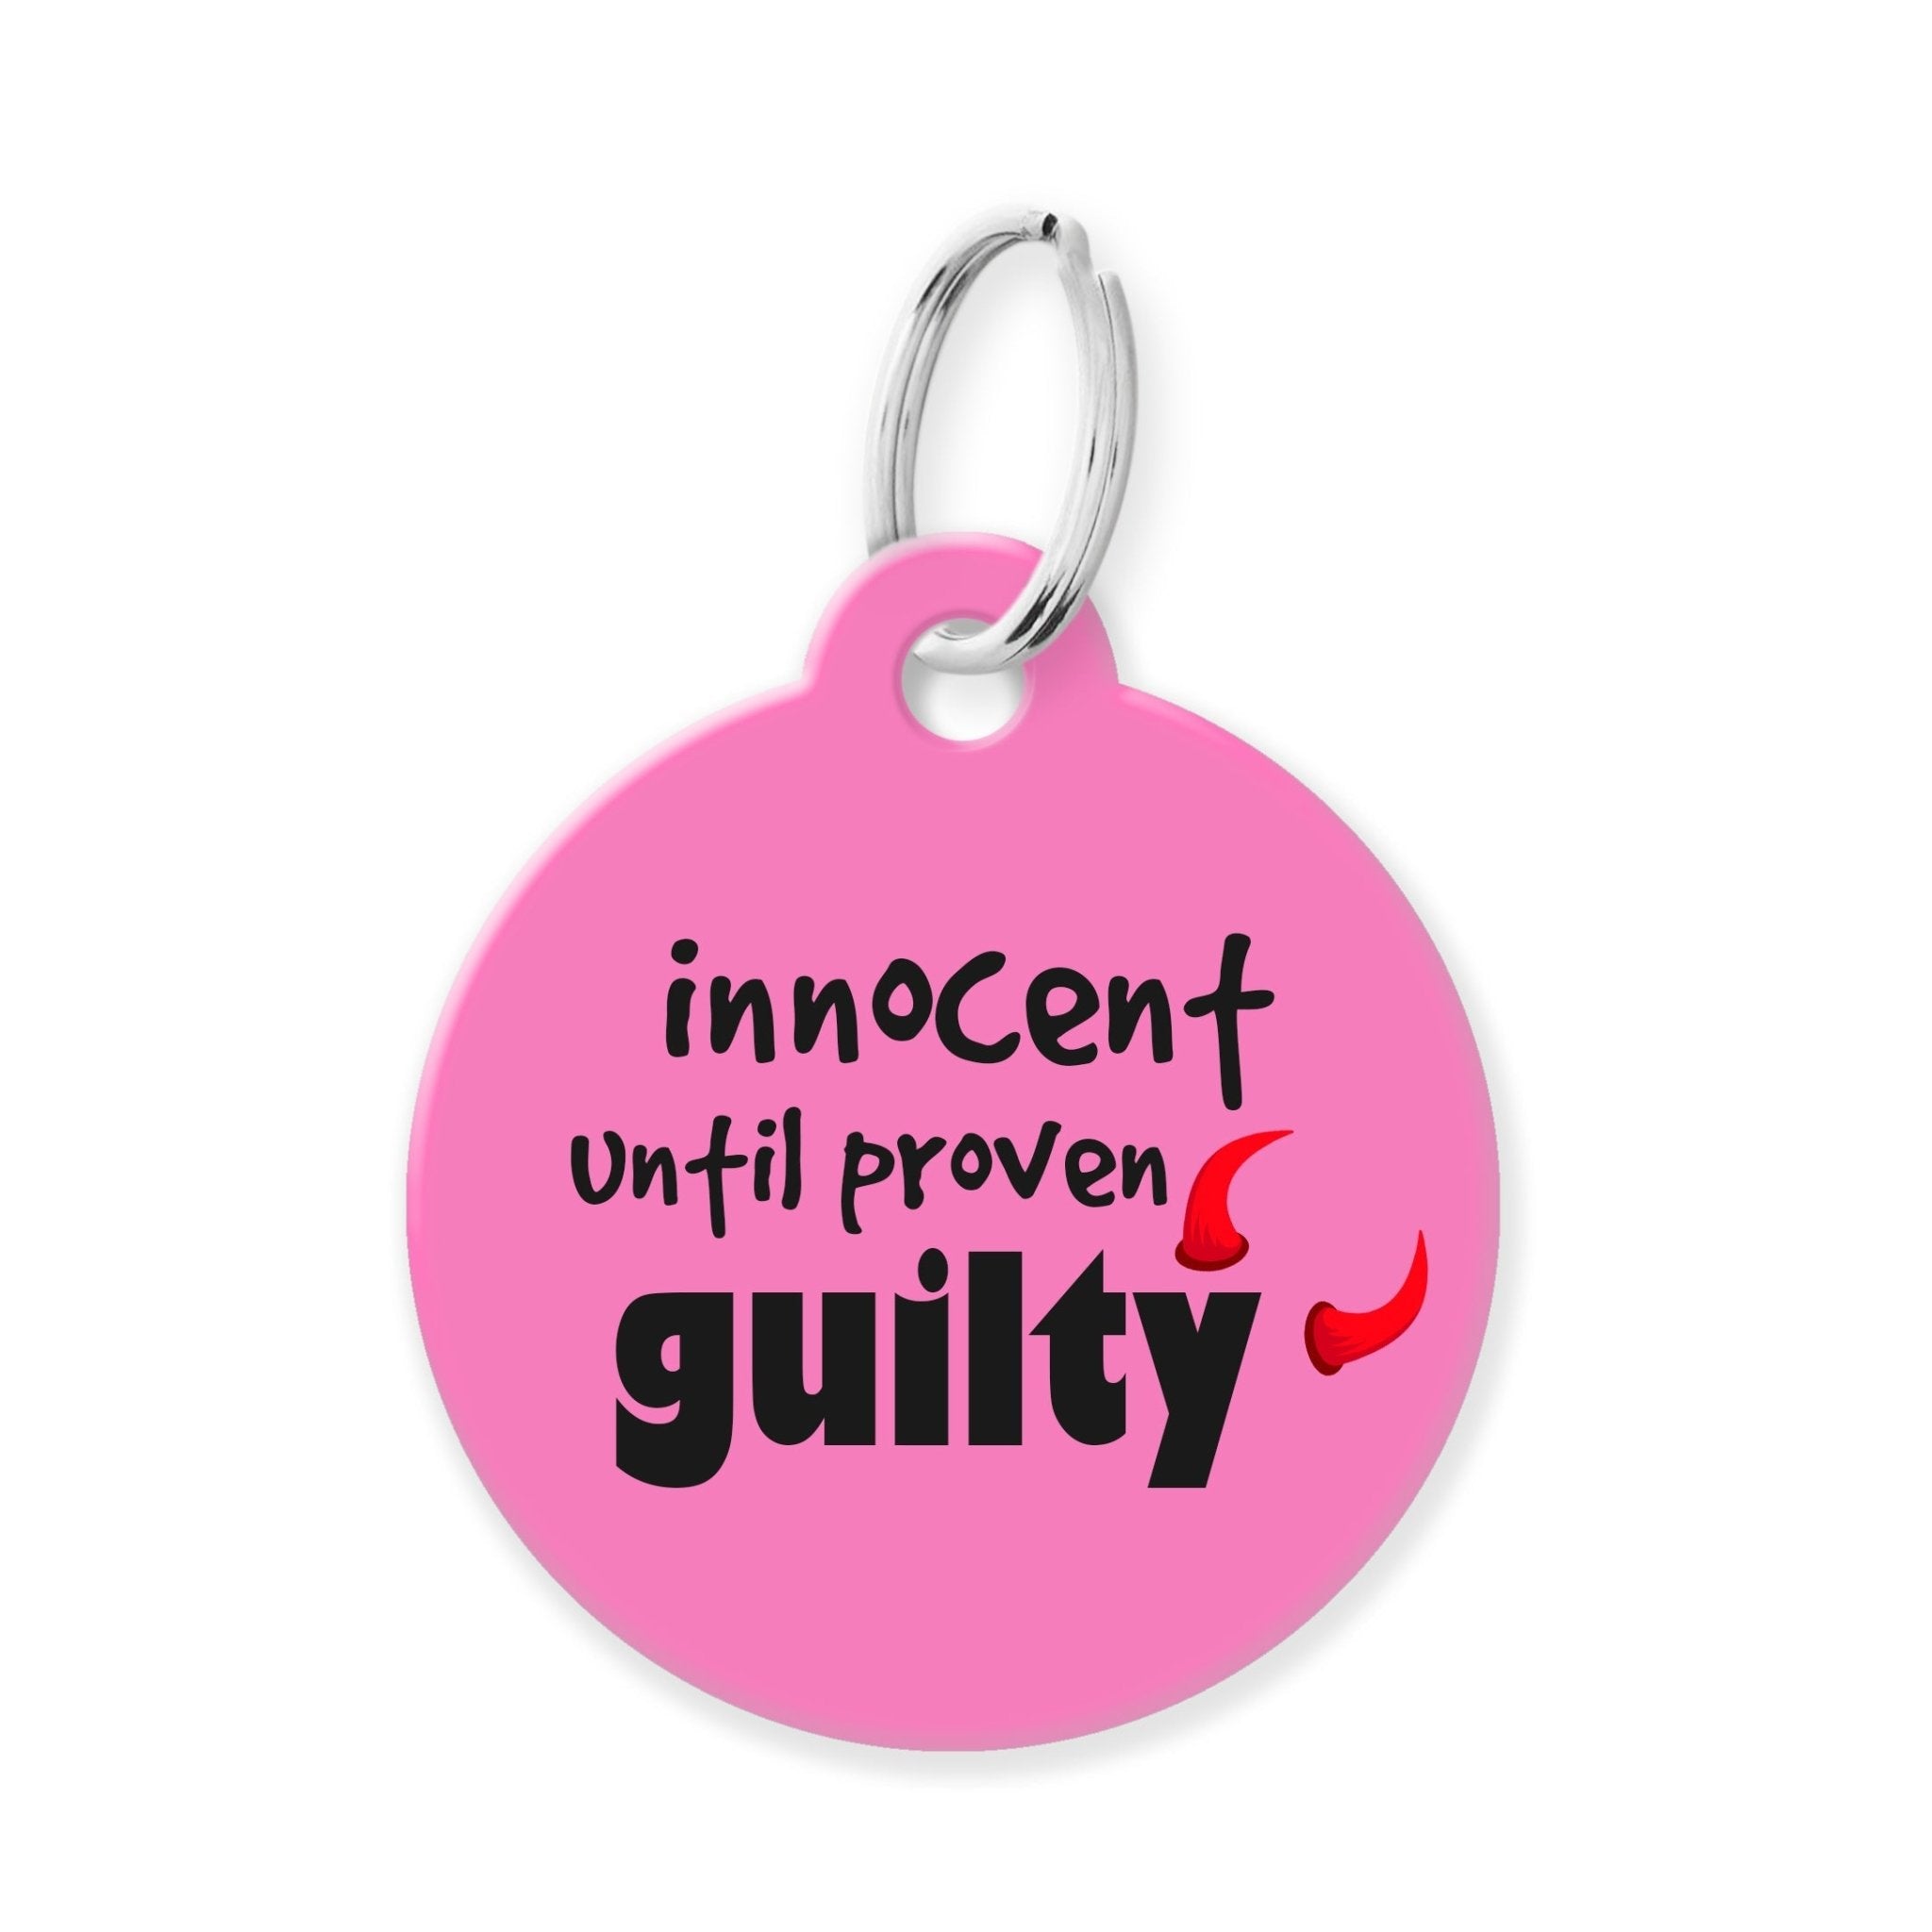 Innocent Until Proven Guilty Funny Pet Tag - The Barking Mutt